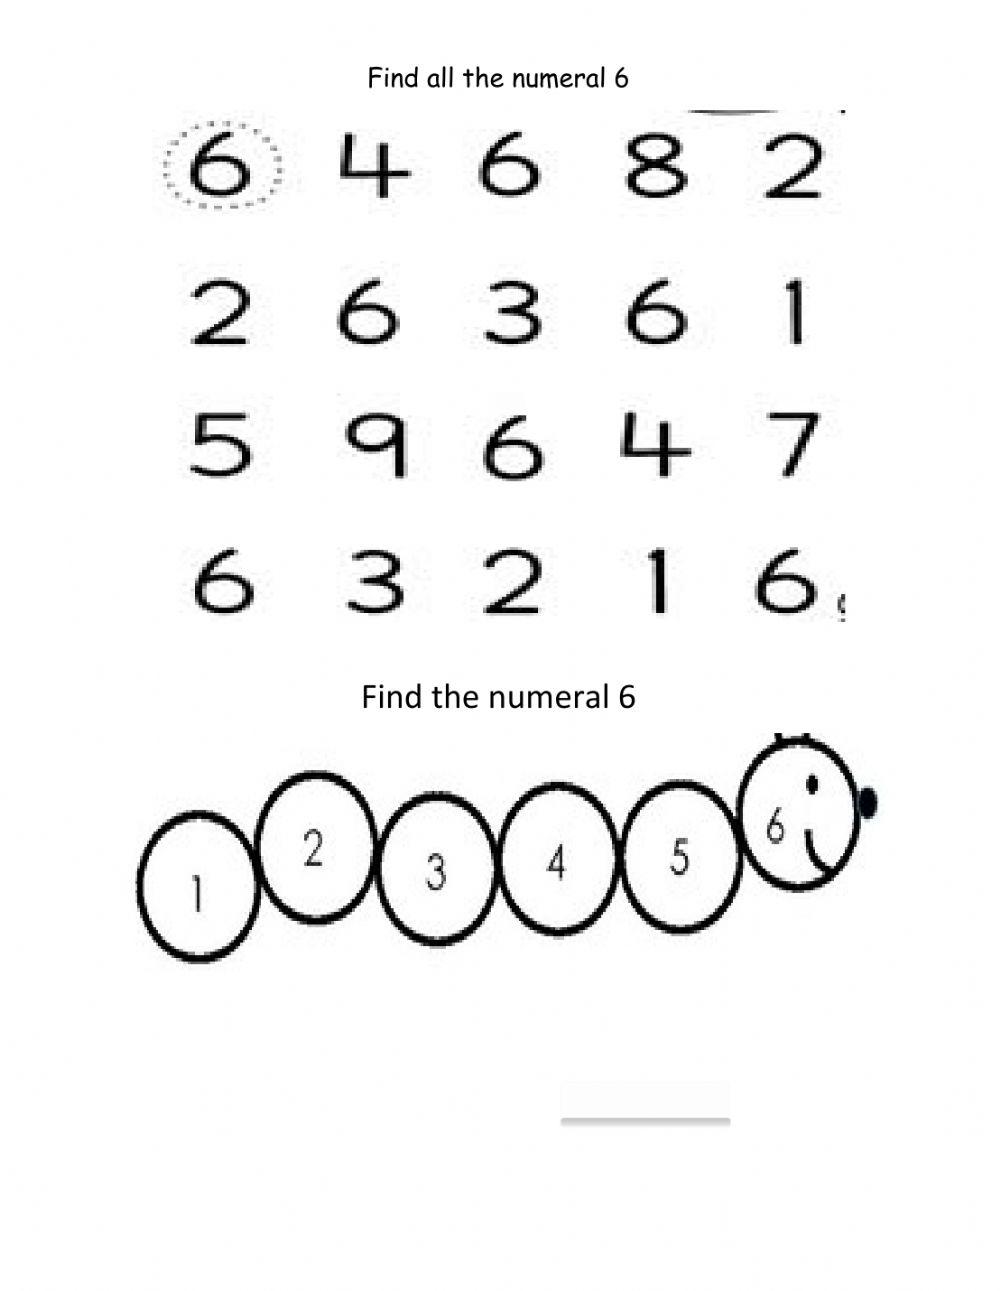 Find the numeral 6